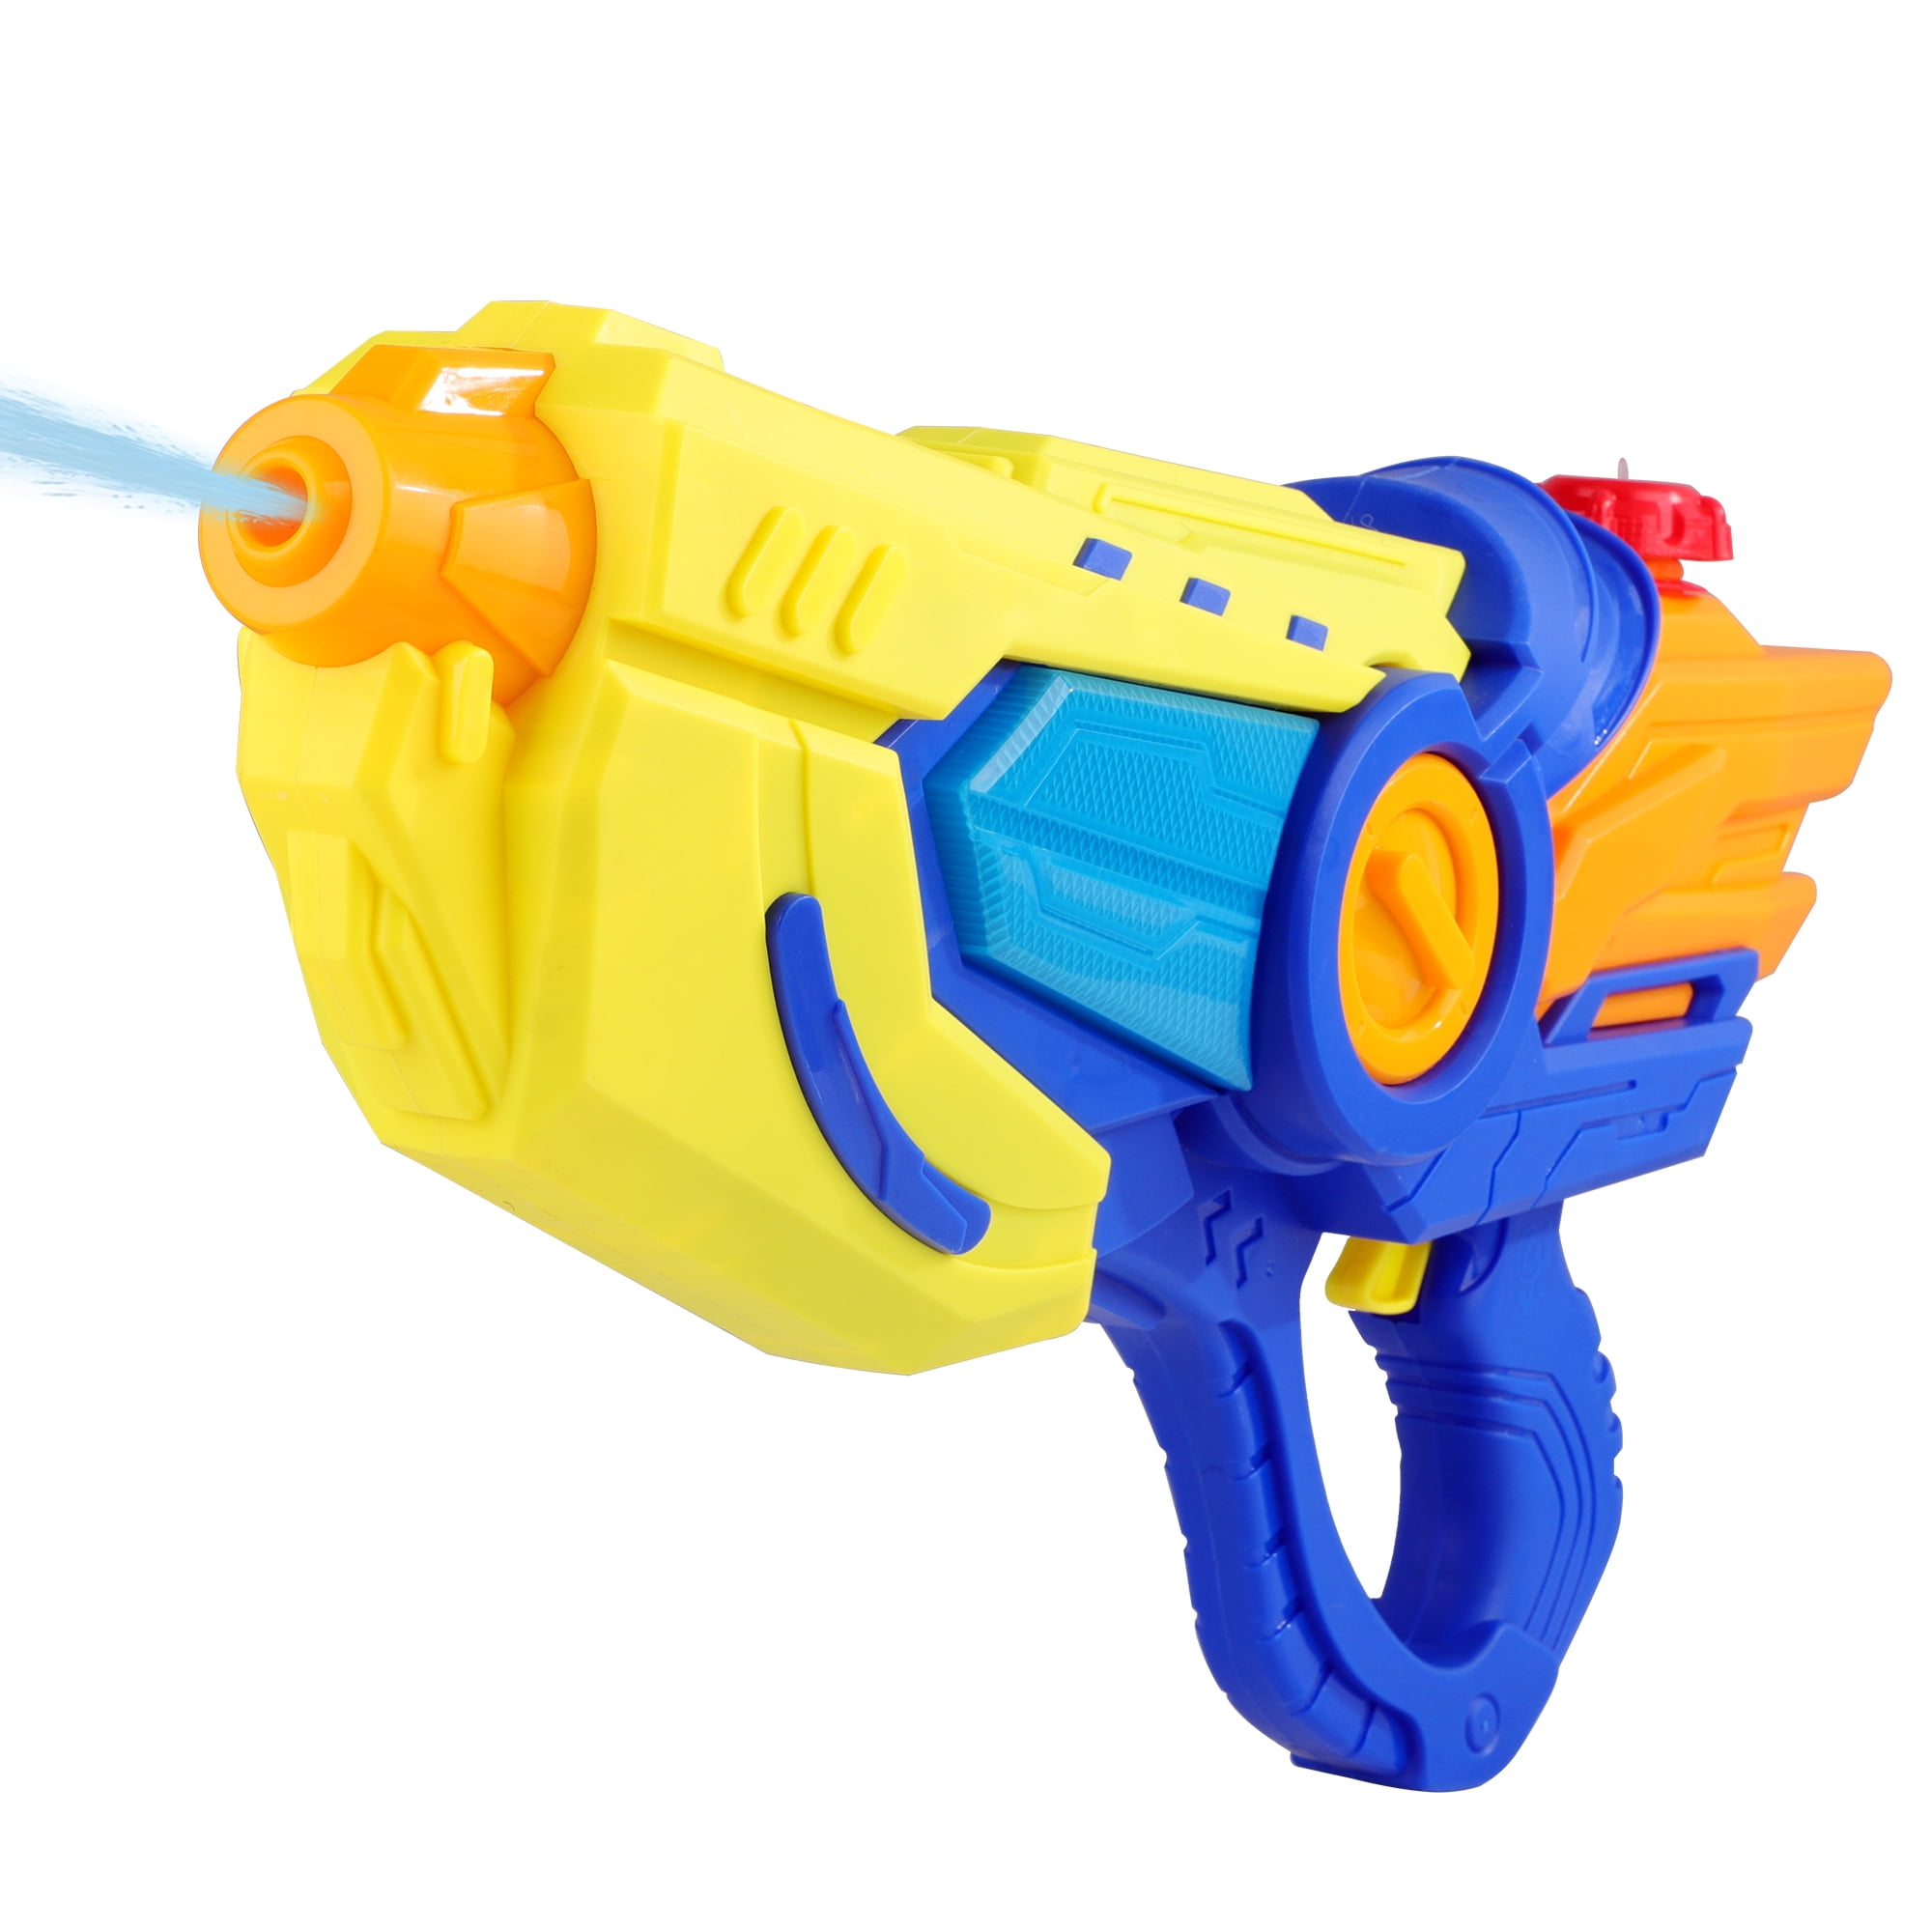 Figoal Water Gun for Kids Adults Super Squirt Gun Shoot Up to 36 Feet High Capacity Water Soaker Blaster Summer Toy for Swimming Pool Party Outdoor